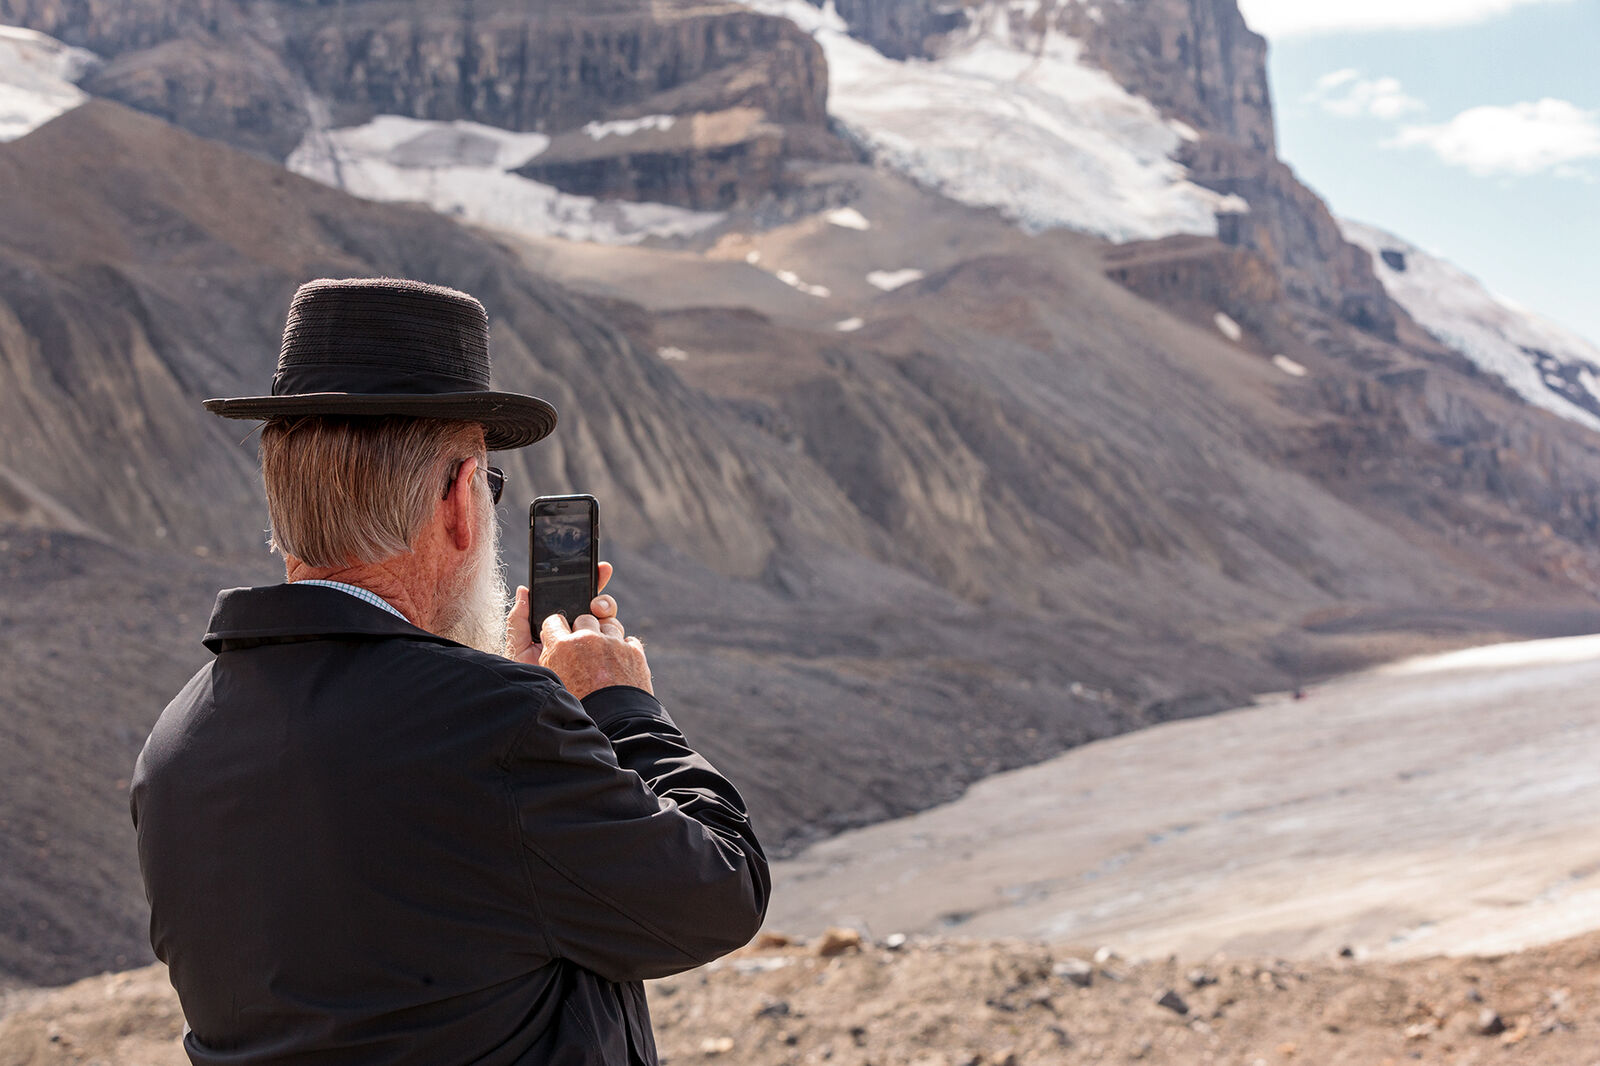 Man taking a photo of the Athabasca Glacier on his cellphone in Alberta, Canada